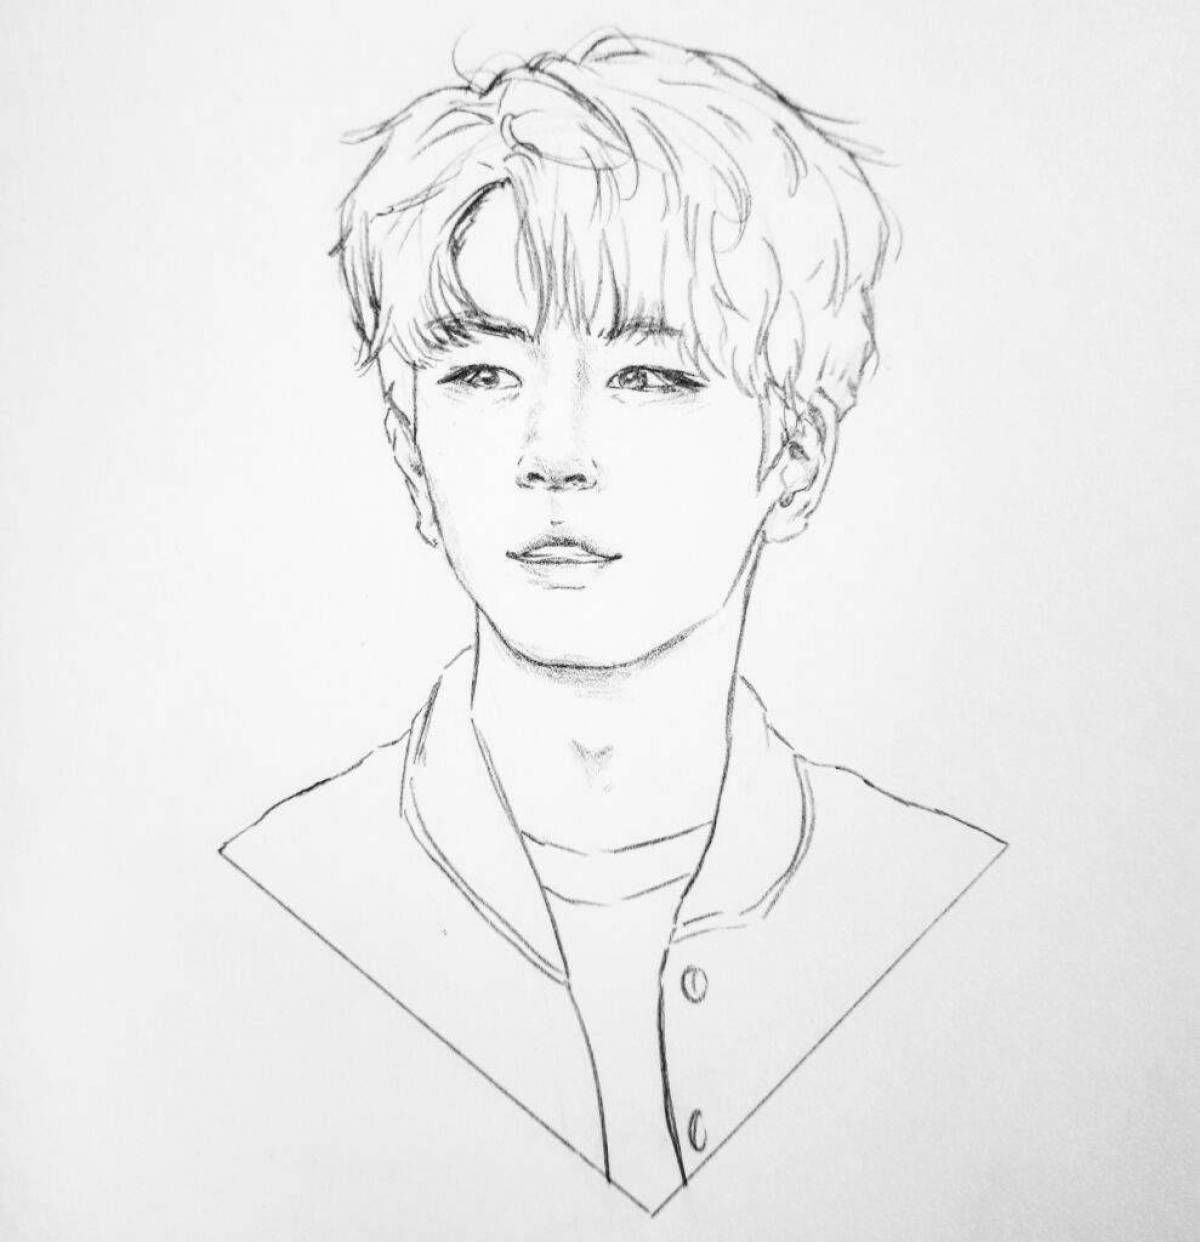 Stray kids coloring book